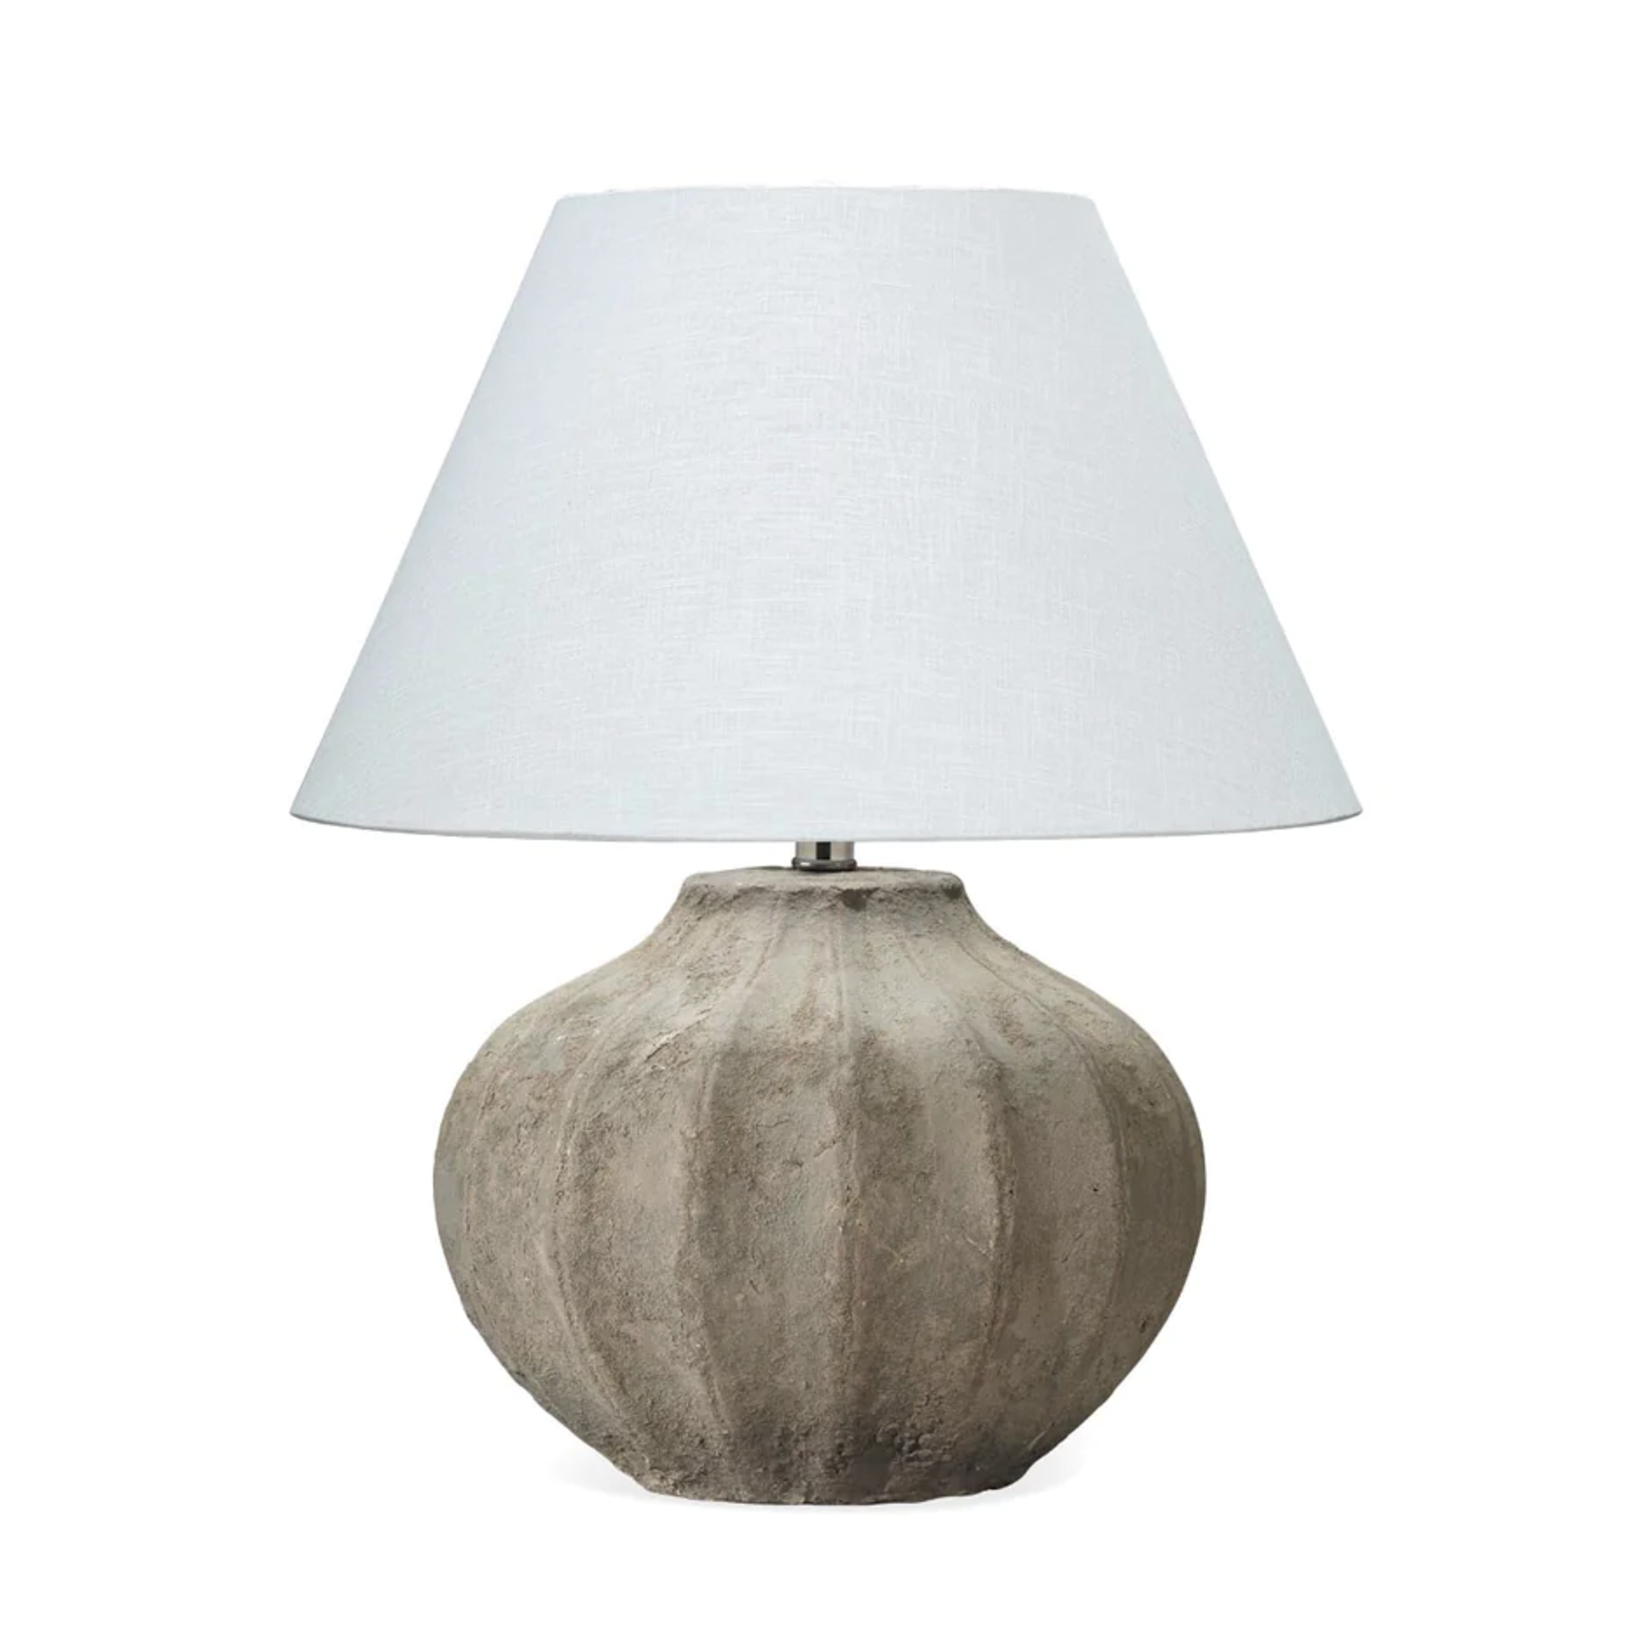 G5 Clamshell Table Lamp